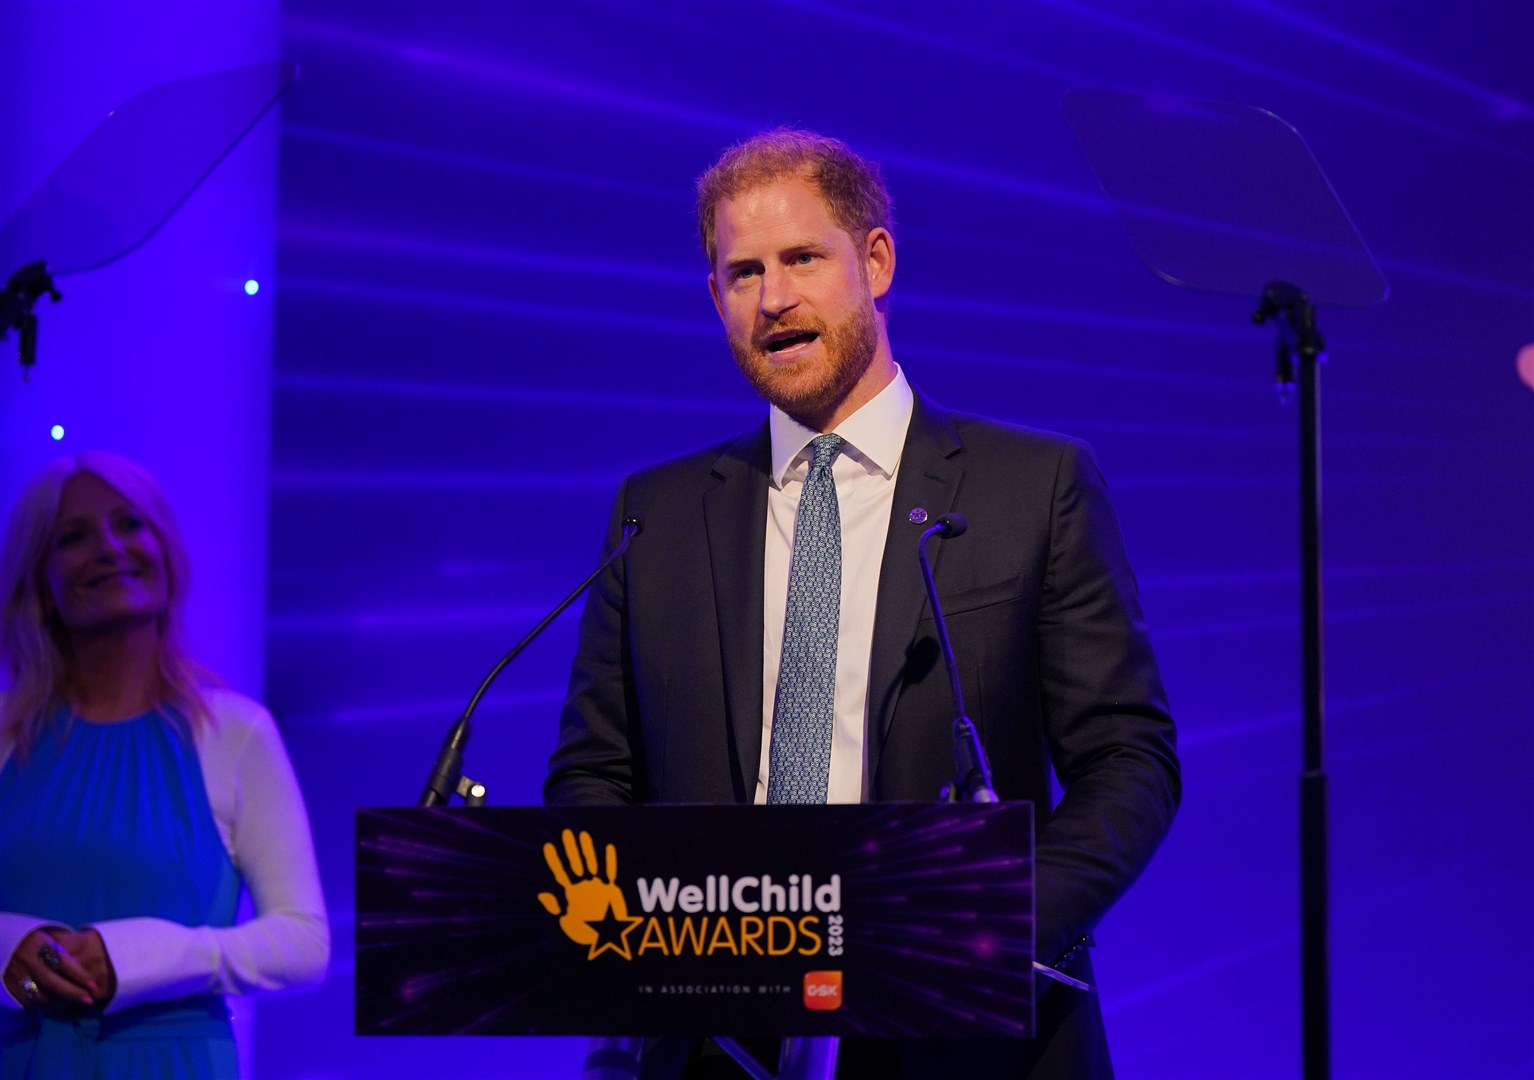 The Duke of Sussex giving a speech at the annual WellChild Awards (Yui Mok/PA)